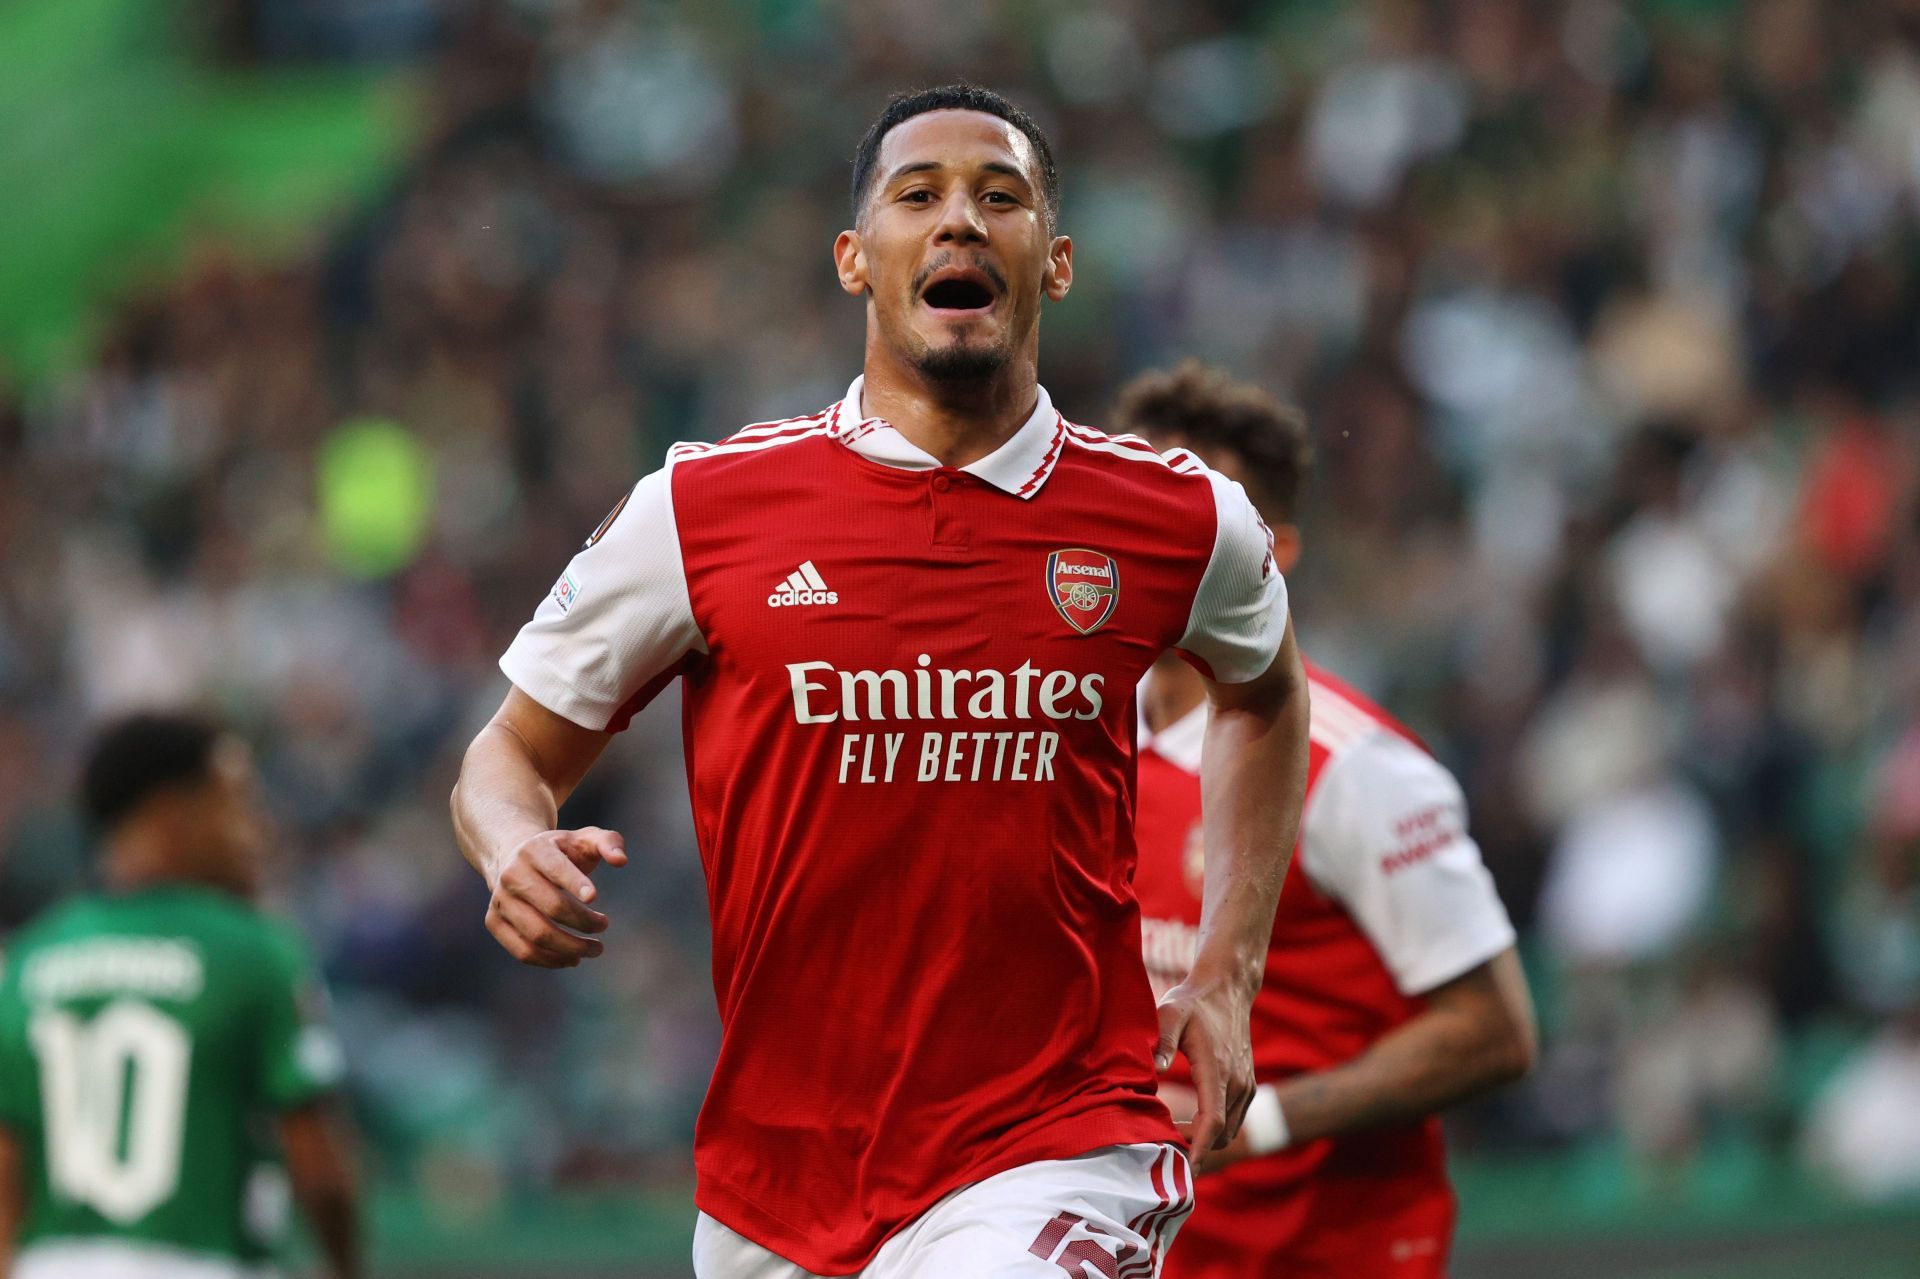 William Saliba is likely to sign a new deal at the Emirates this summer.